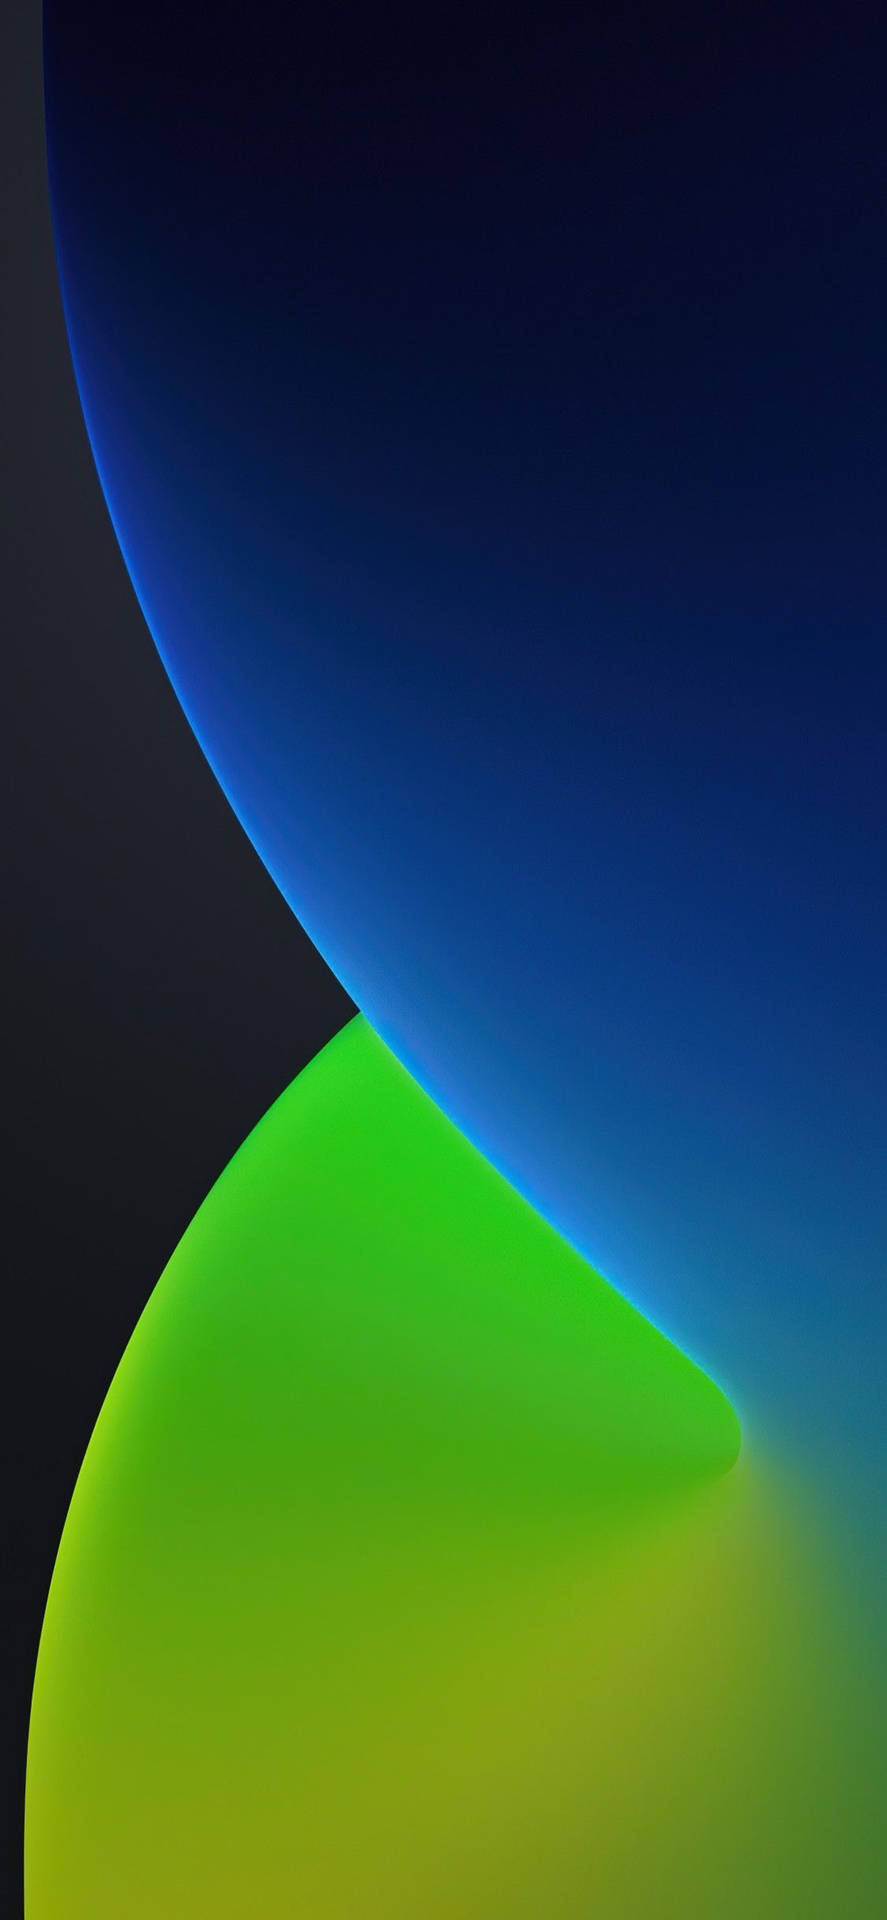 Blue And Green Circle Overlapping Ios 12 Background